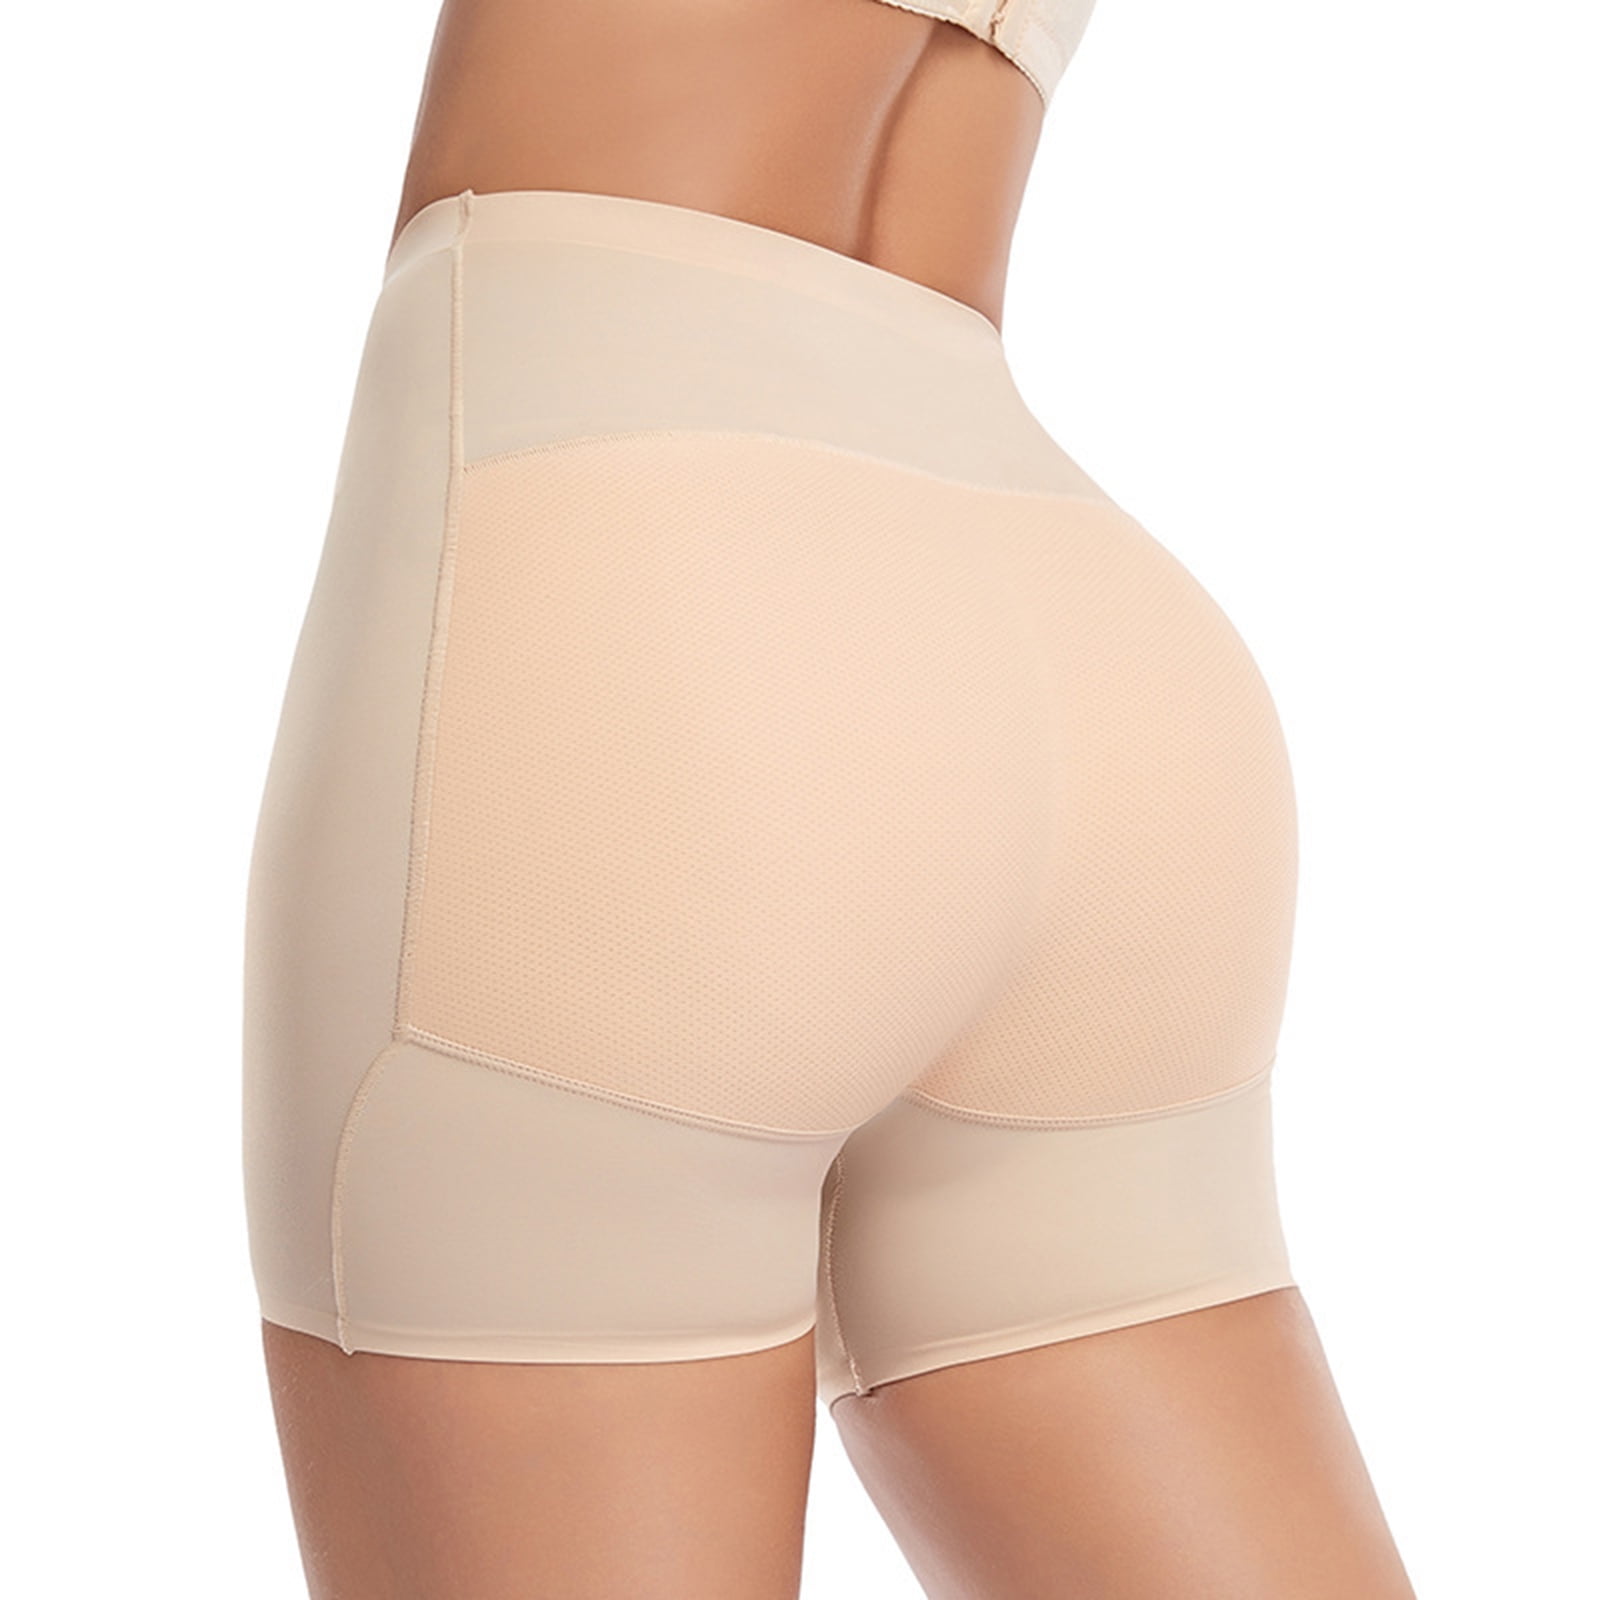 Phenovo Women Fake Ass Butt And Hip Enhancer Booty Padded Underwear Pants  Shaperwear  Beige 4XL as described  Amazonin Clothing  Accessories